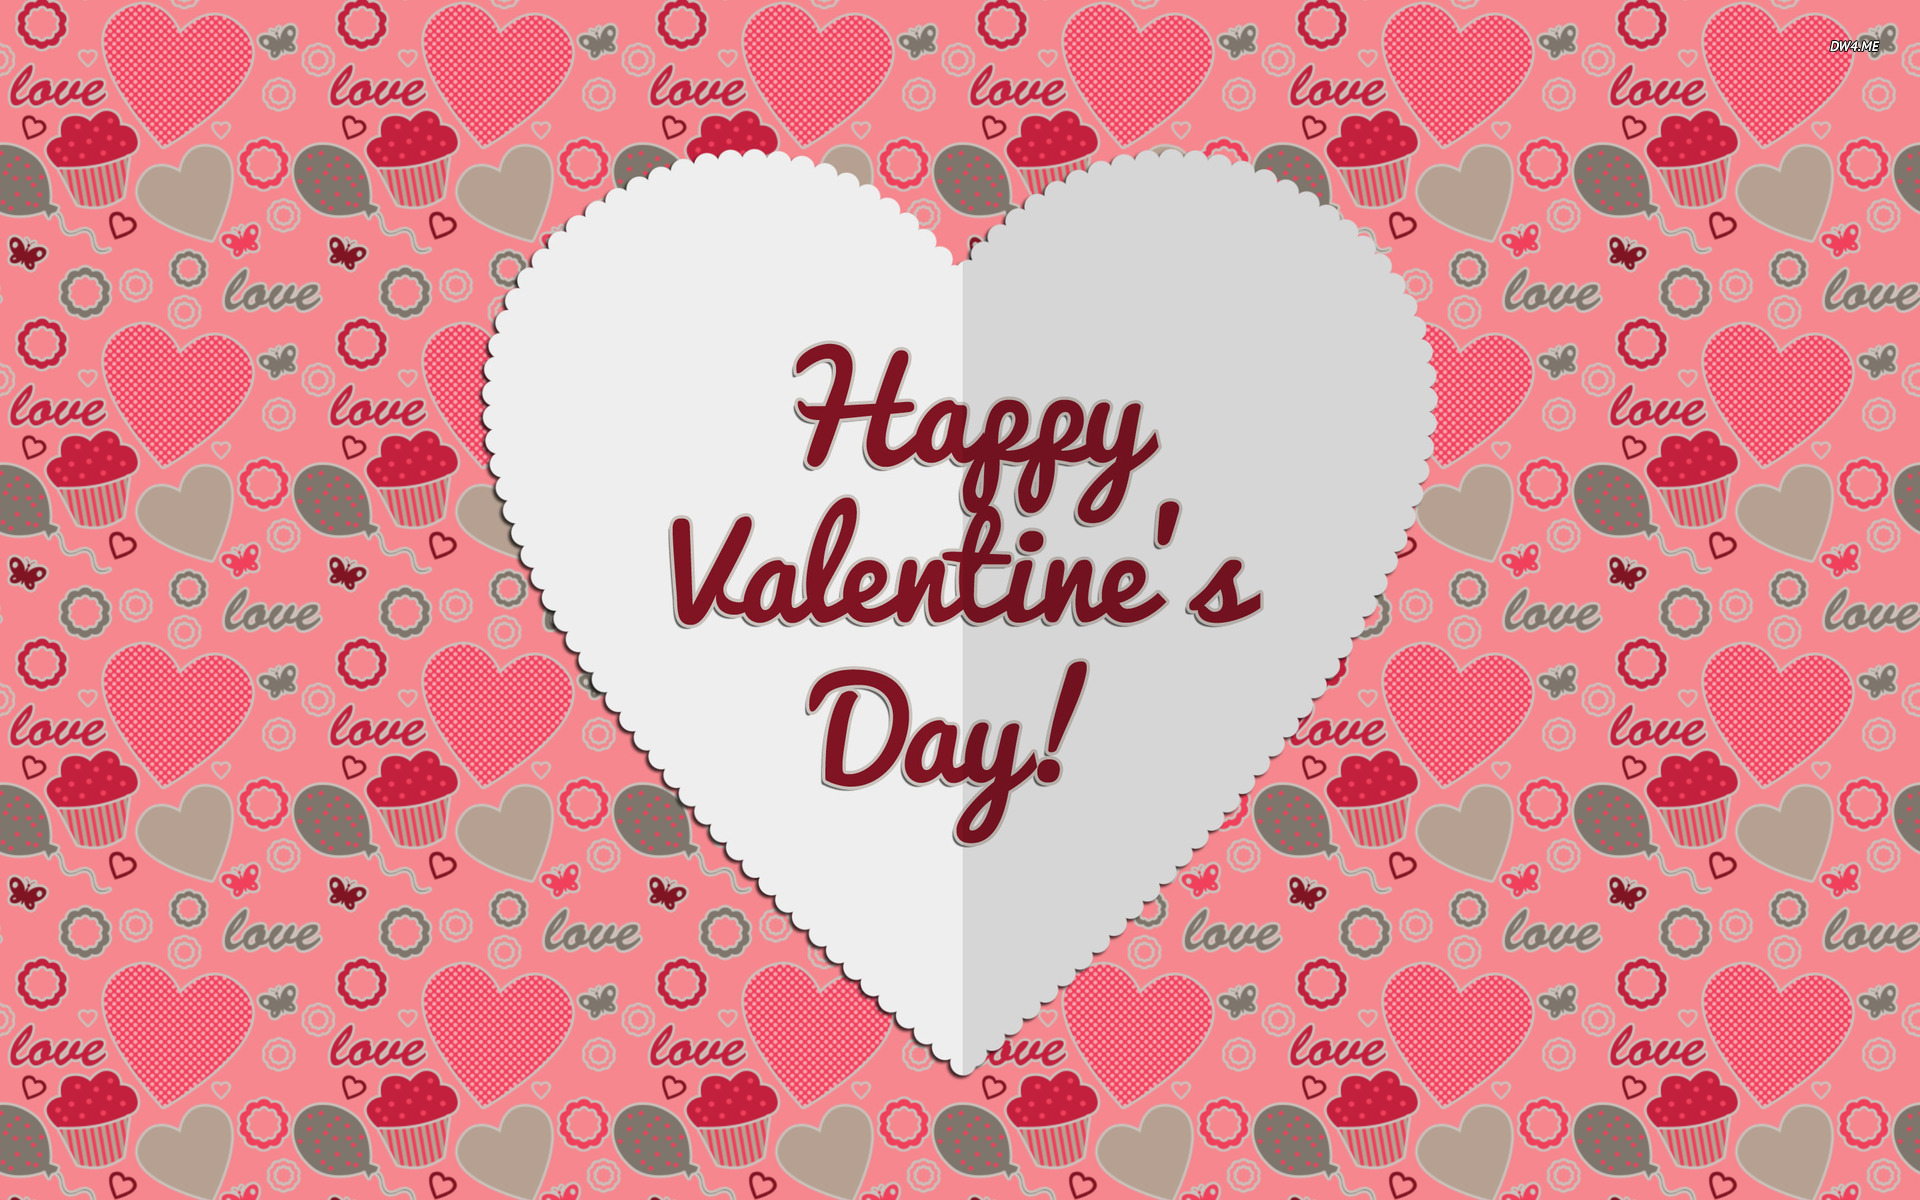 Happy Valentines Day Image Amp Wallpaper For Girlfriend